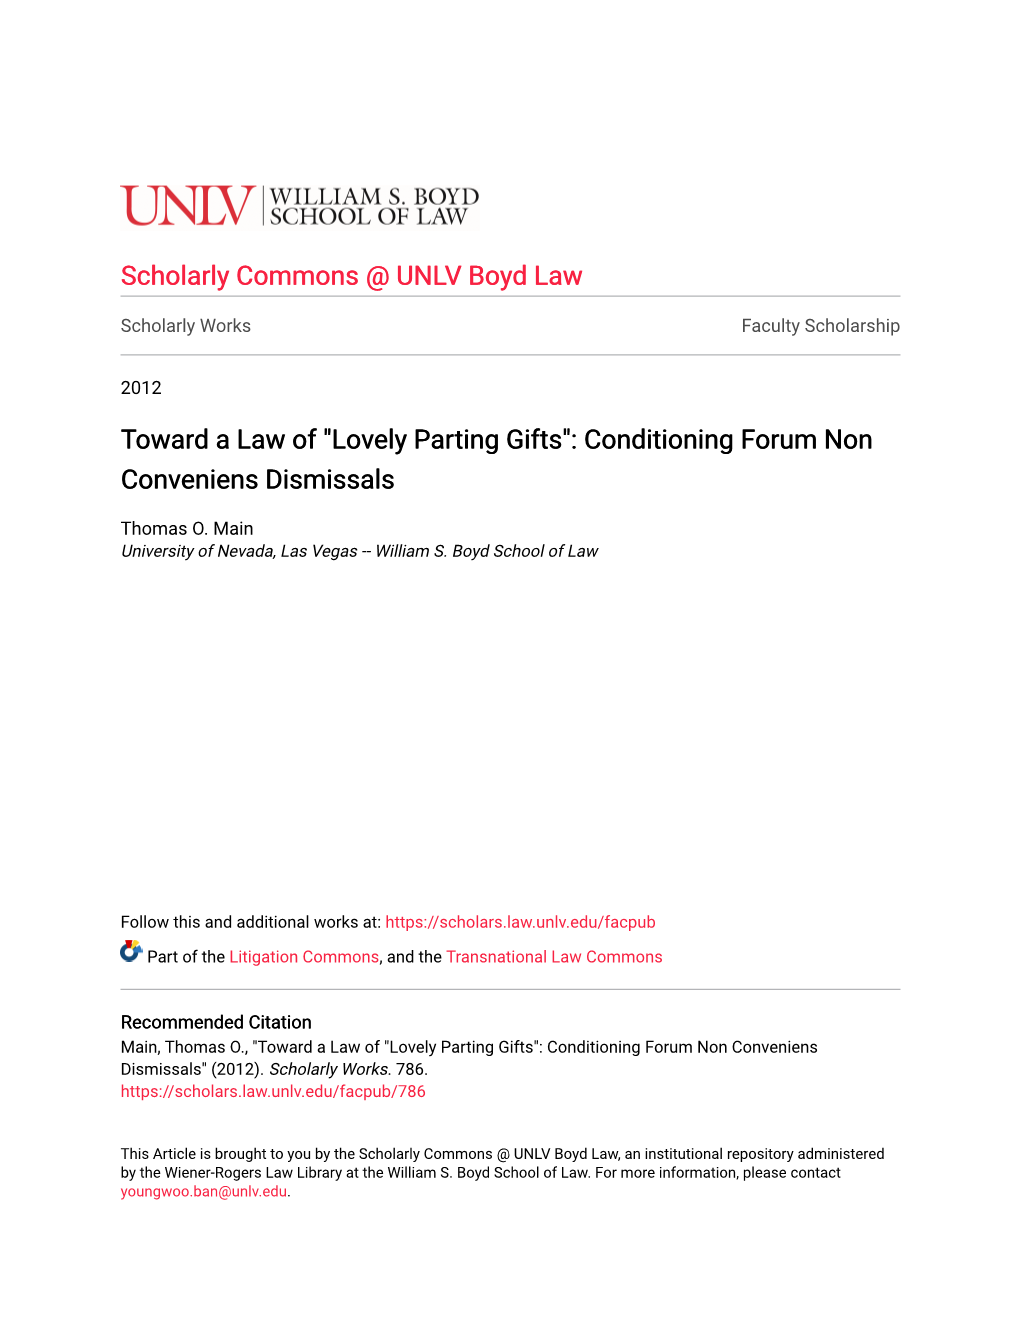 "Lovely Parting Gifts": Conditioning Forum Non Conveniens Dismissals